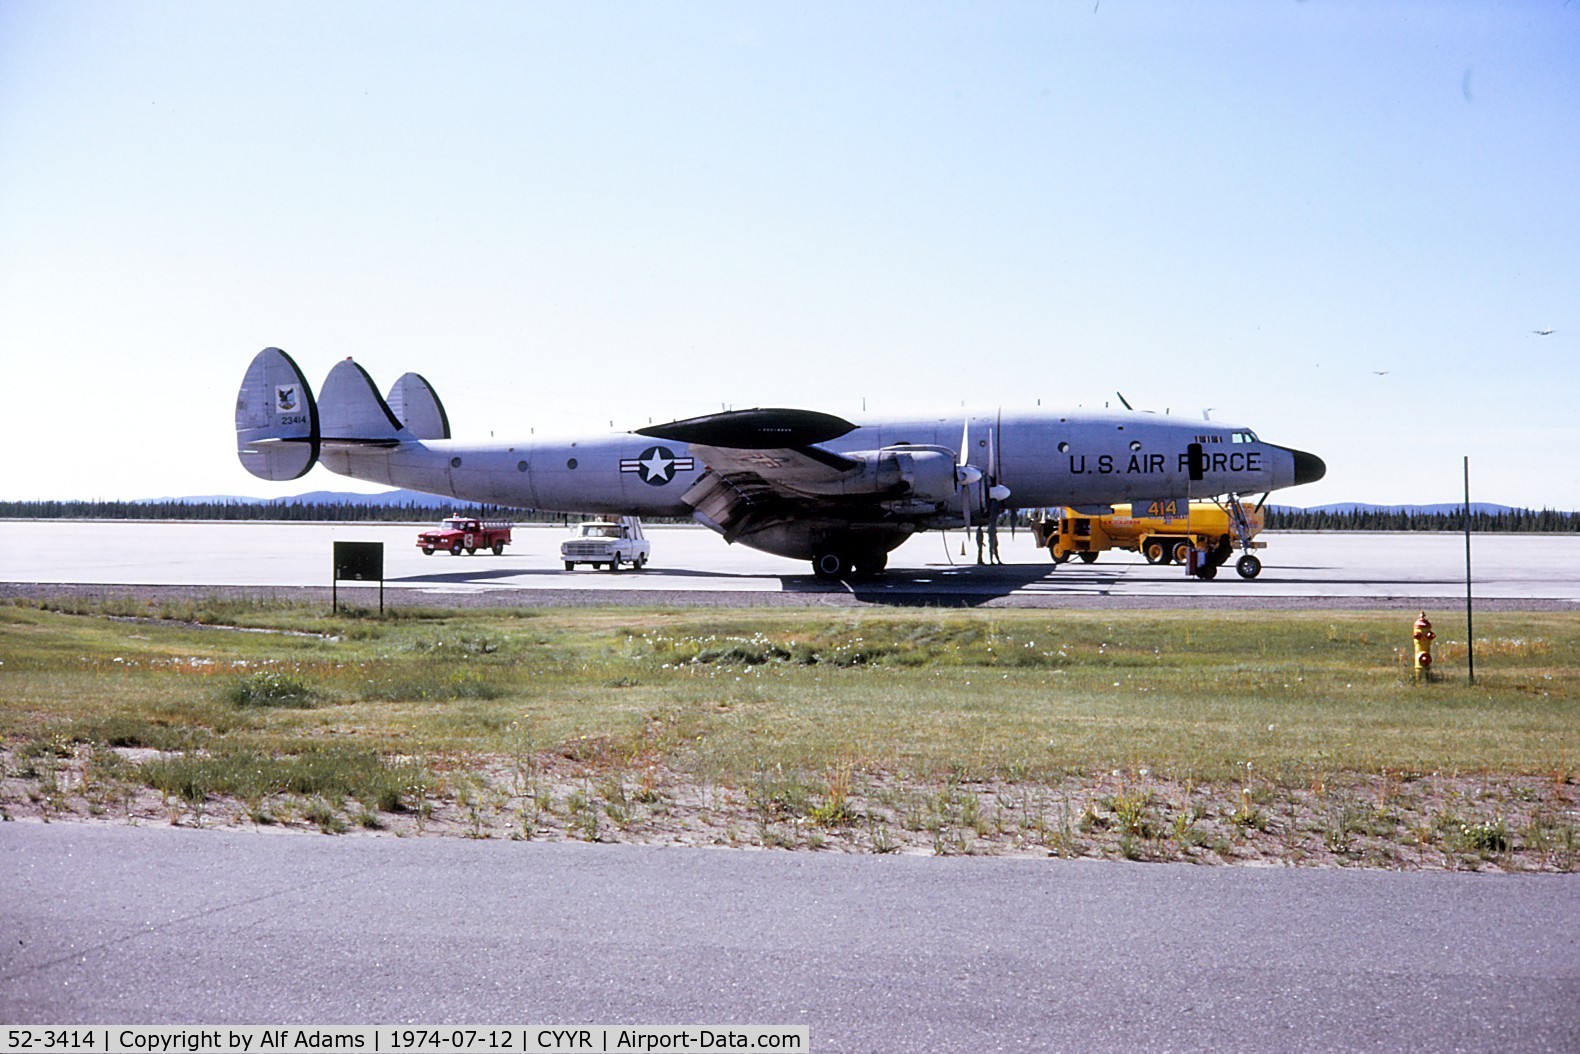 52-3414, 1952 Lockheed EC-121D Warning Star C/N 1049A-4332, At Canadian Force Station, Goose Bay, Labrador in 1974. This aircraft was later converted to EC-121T.